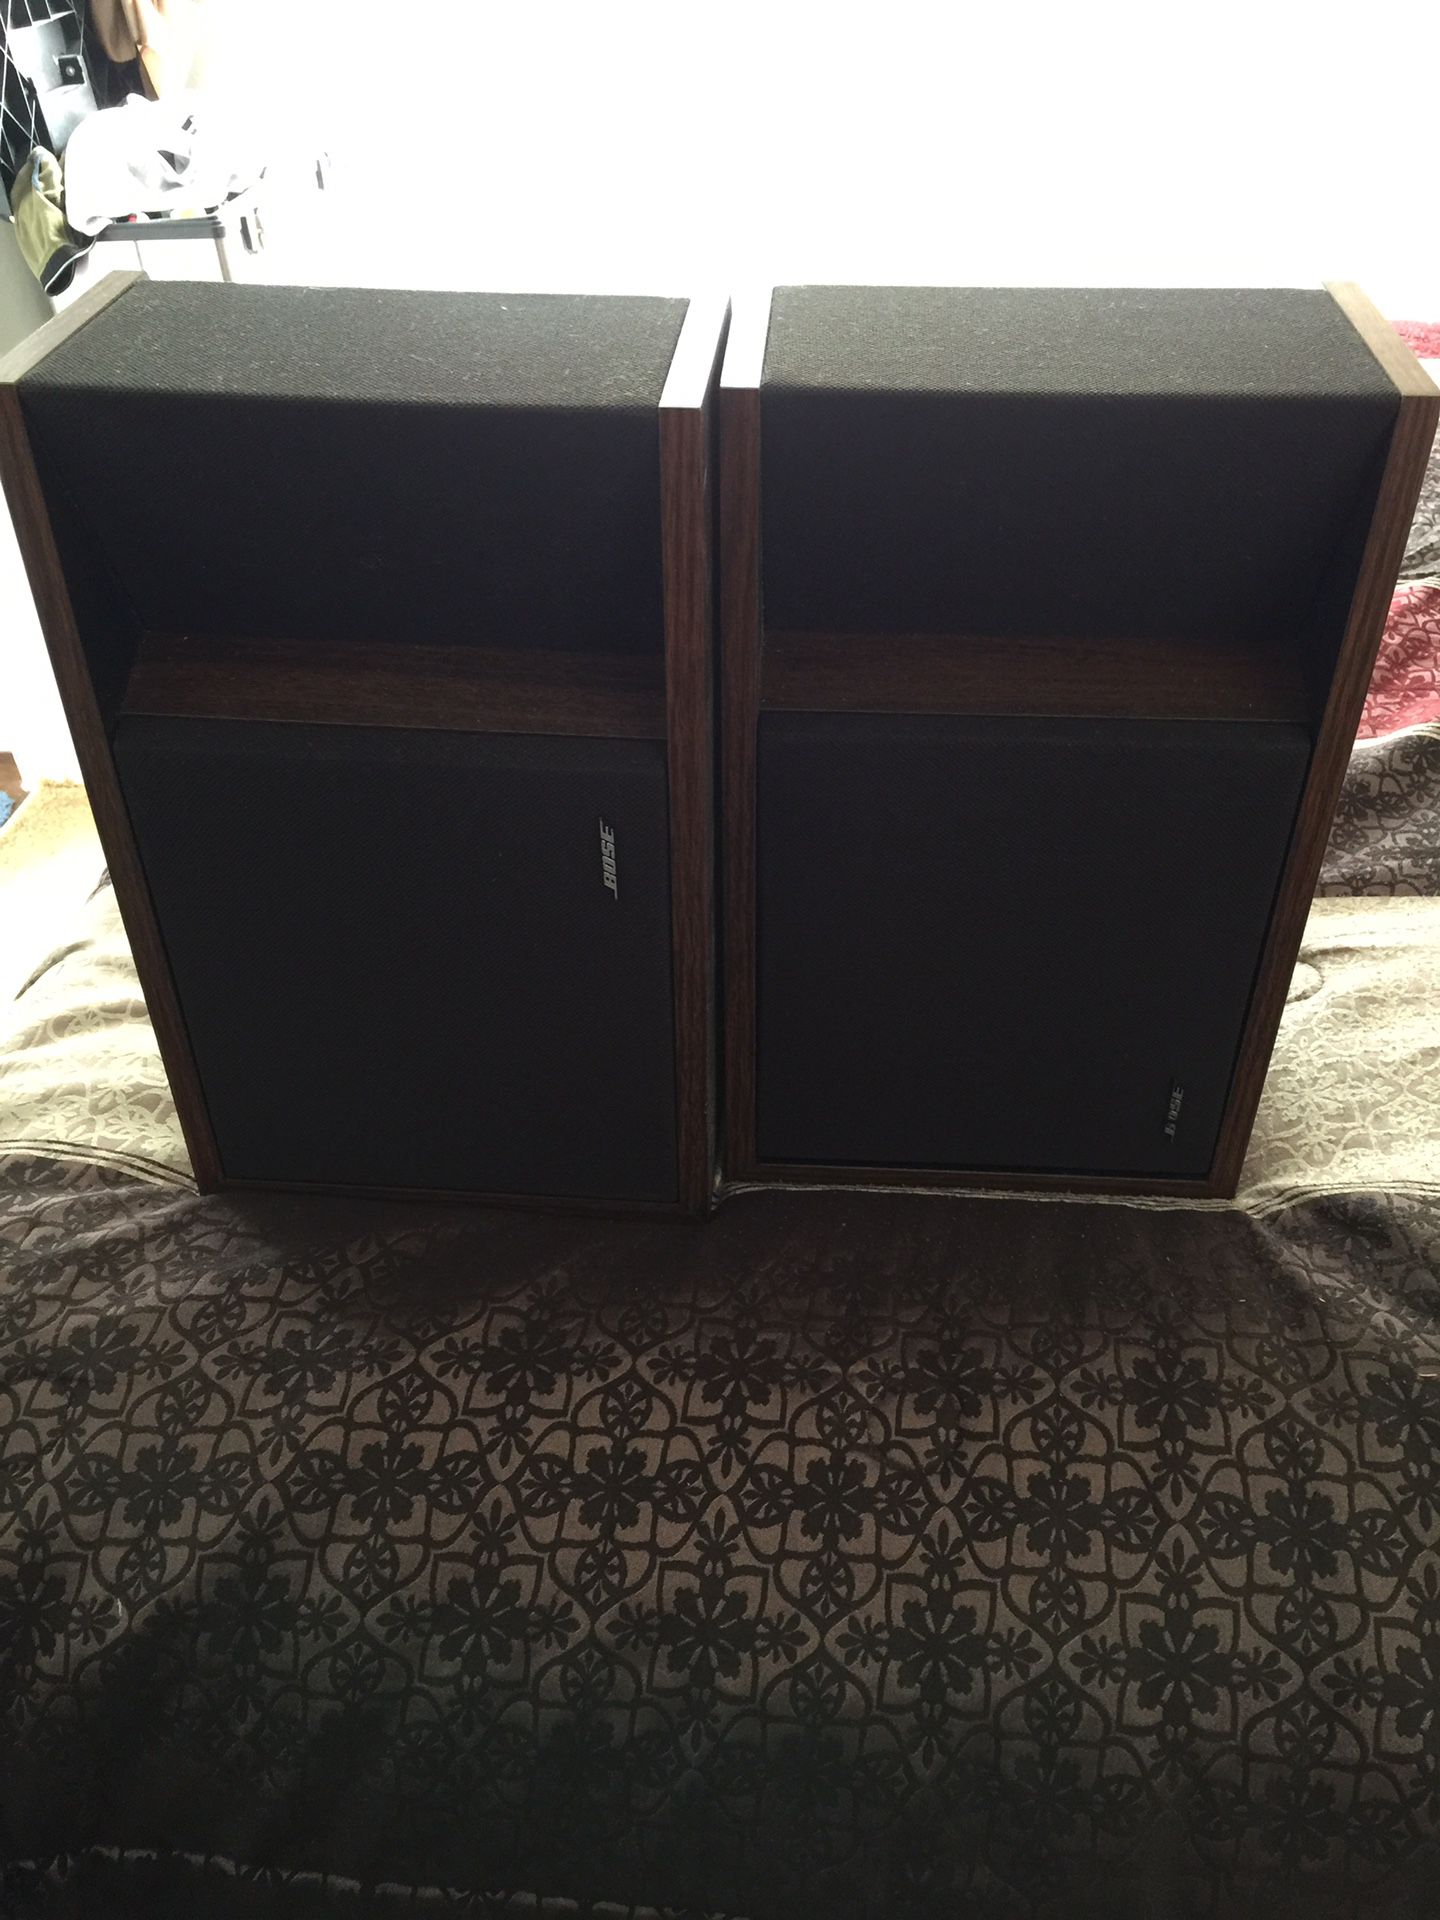 Bose speakers to pair excellent condition